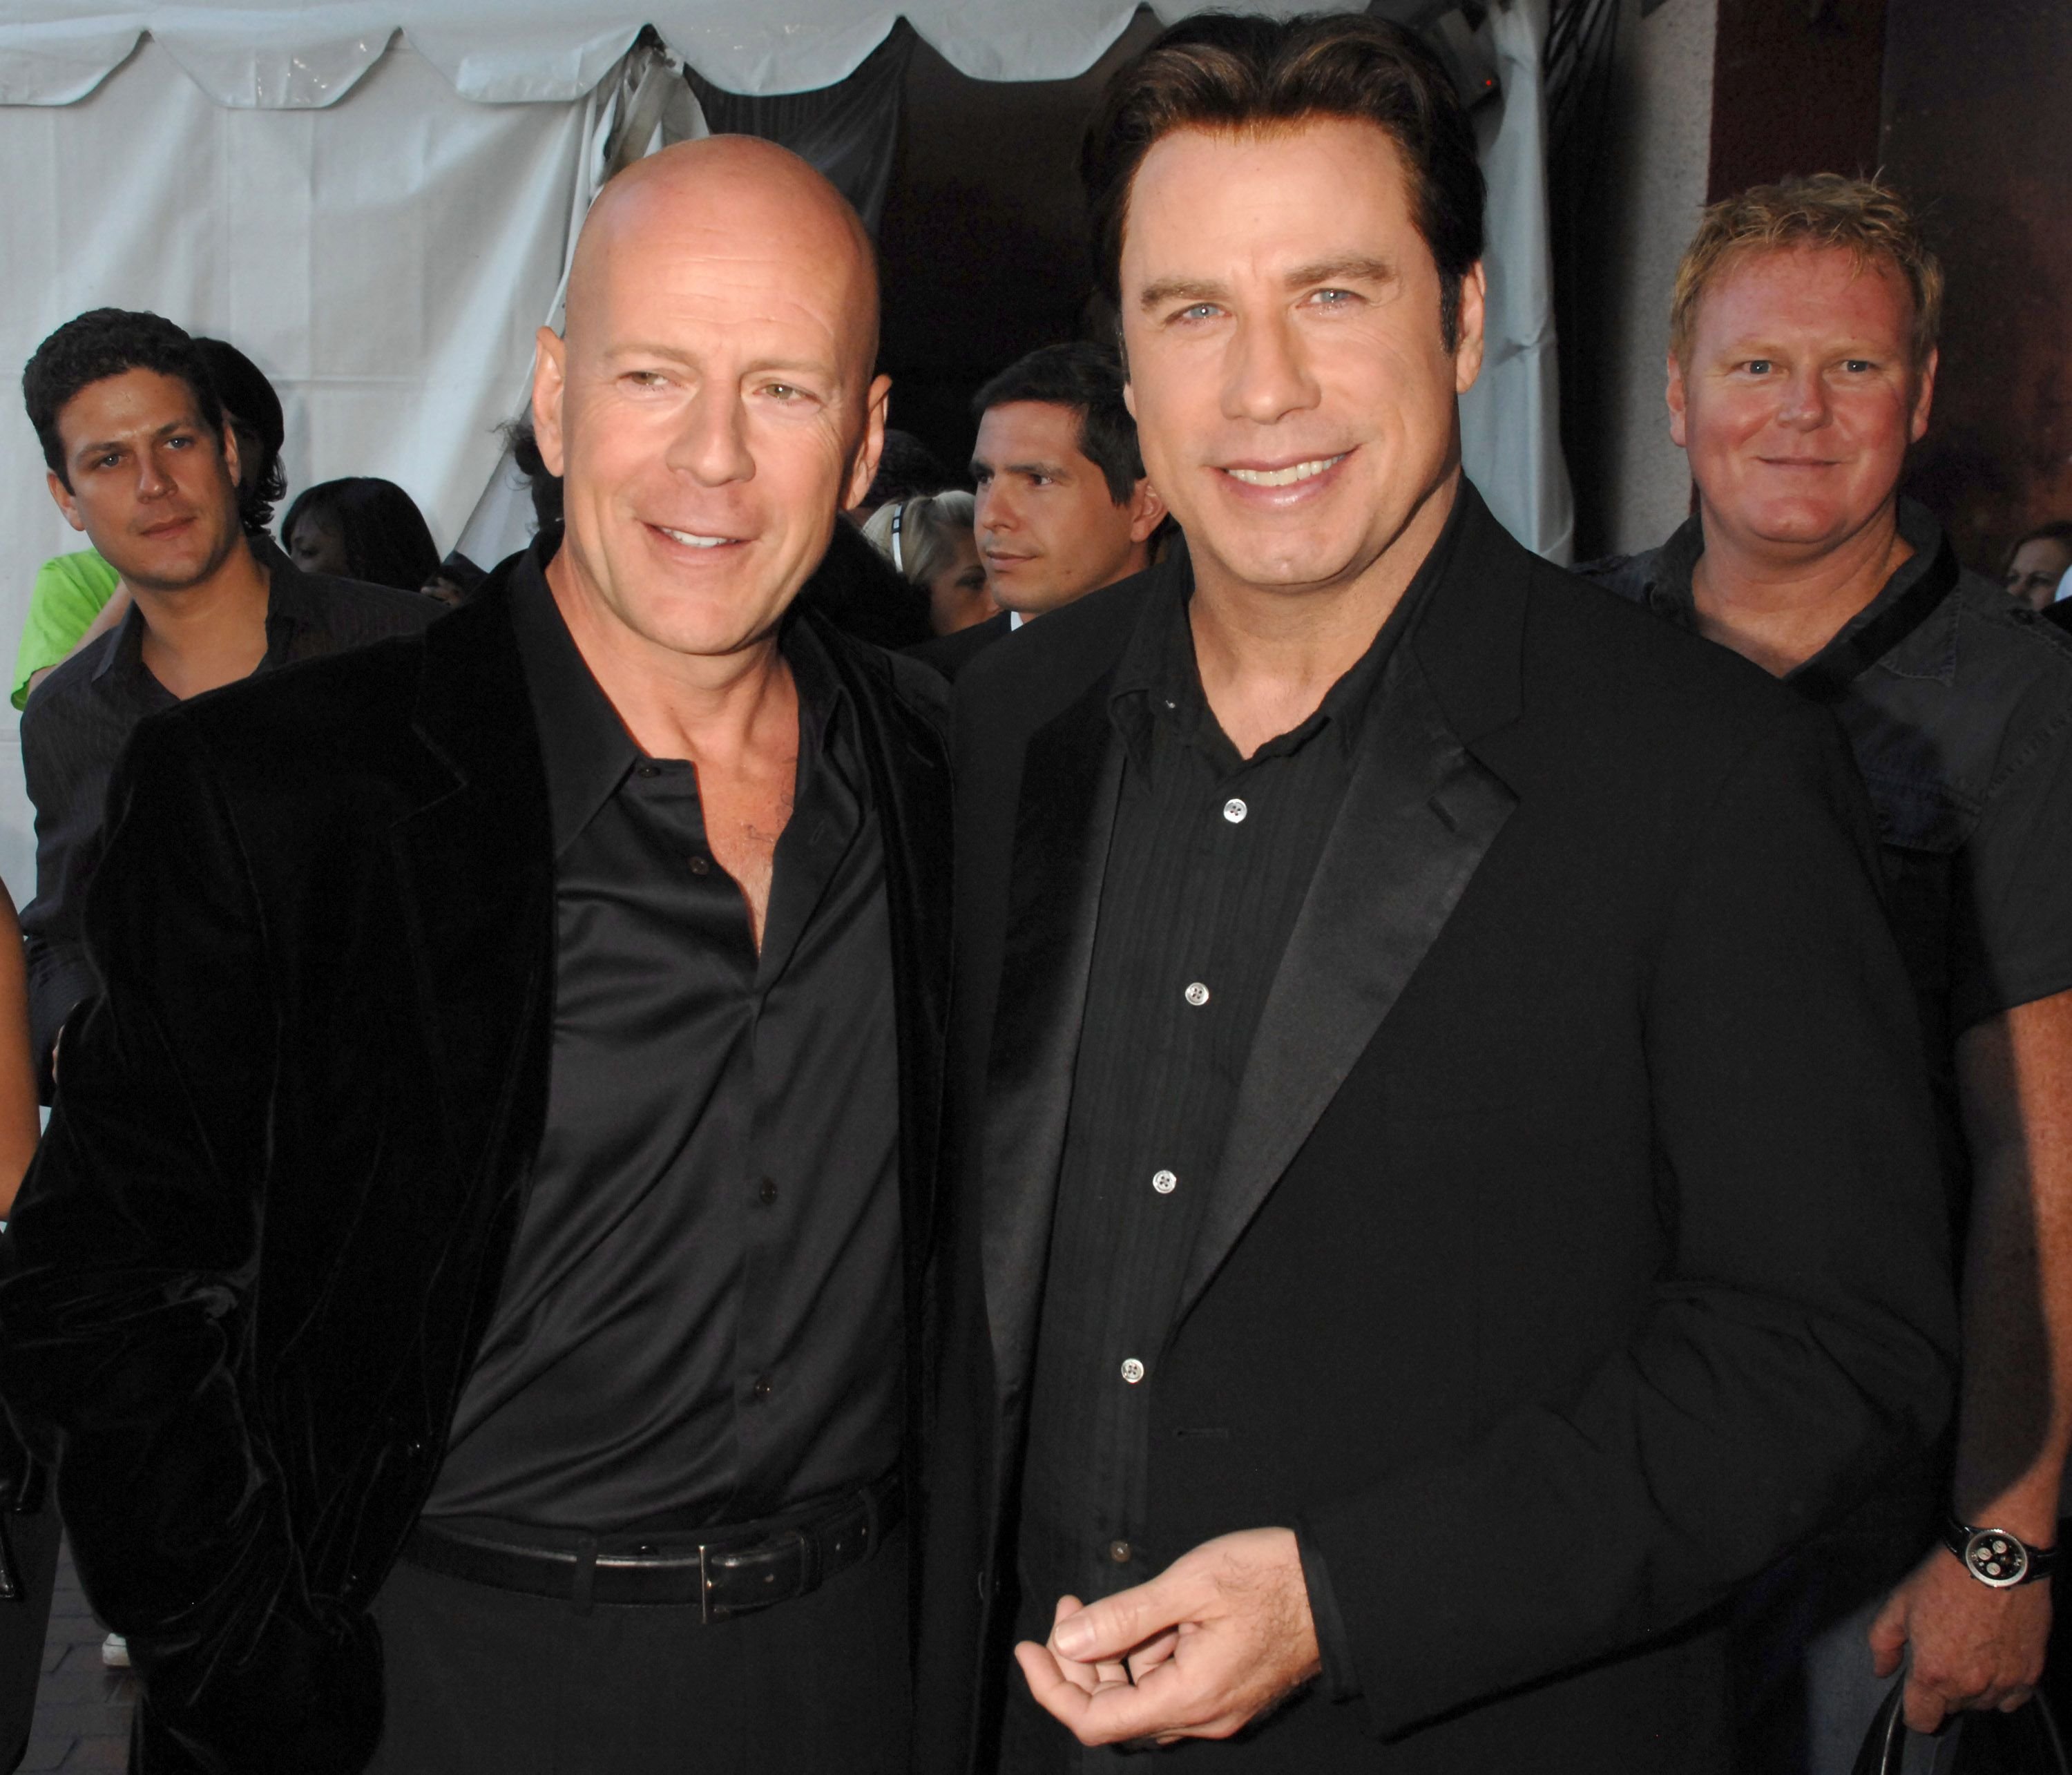 Bruce Willis and John Travolta at the 2007 MTV Movie Awards - Backstage and Audience at Gibson Amphitheater in Los Angeles, California | Photo: Jeff Kravitz/FilmMagic Inc via Getty Images